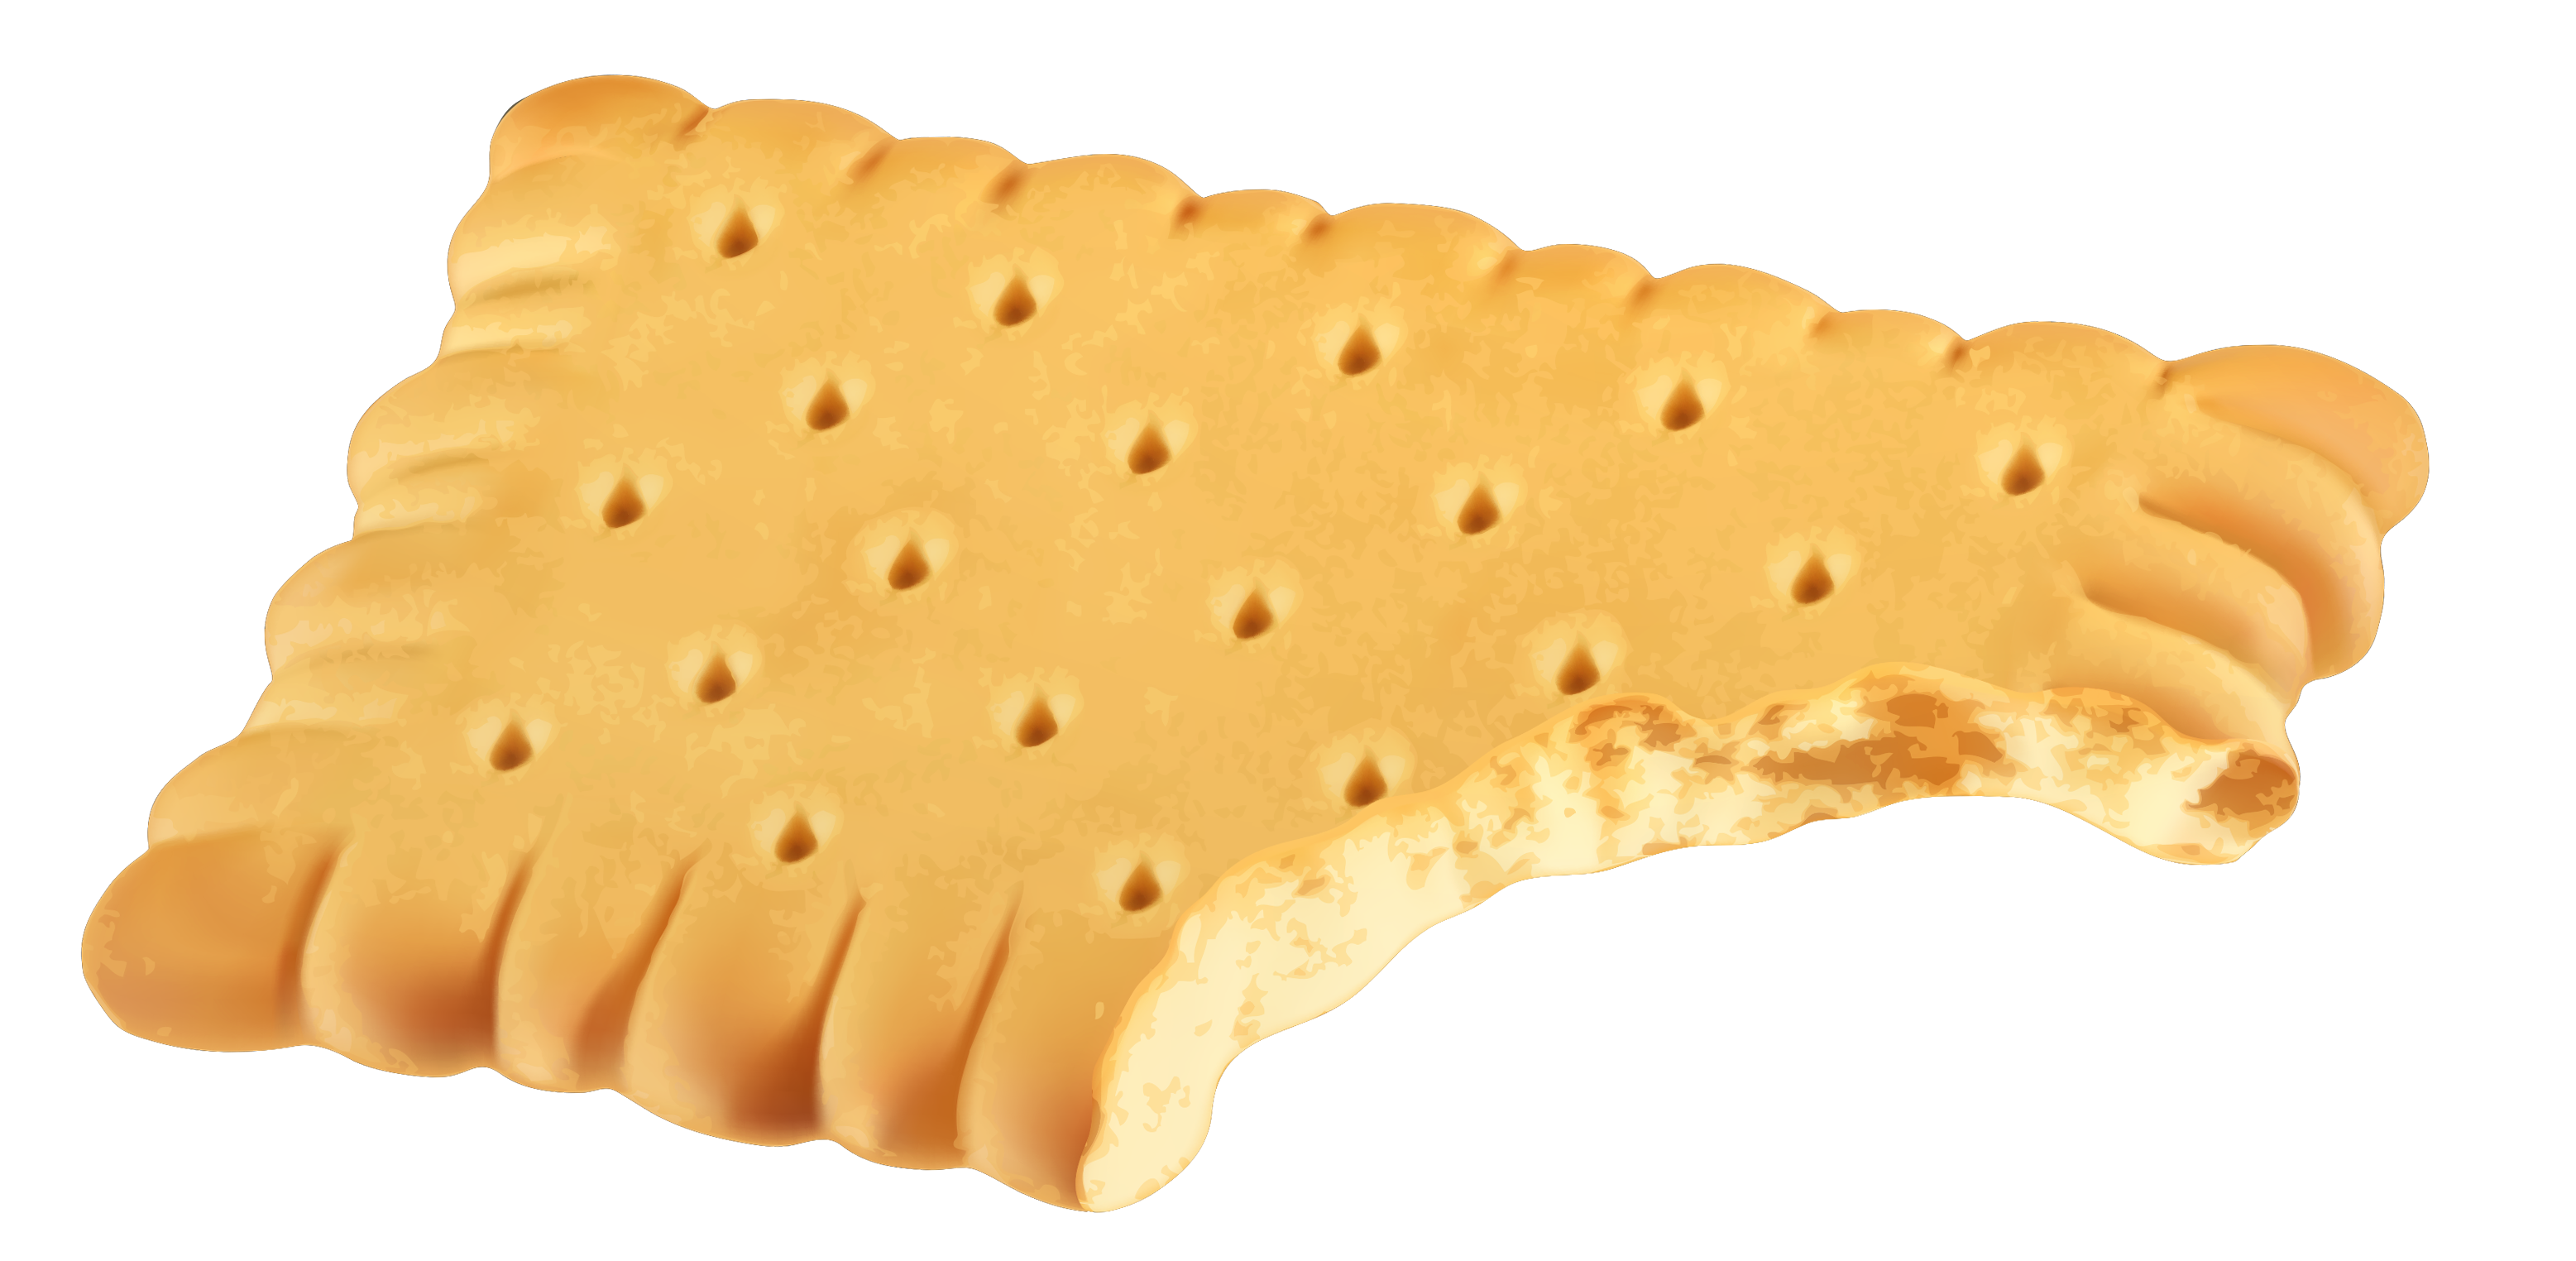 Biscuit PNG images Download